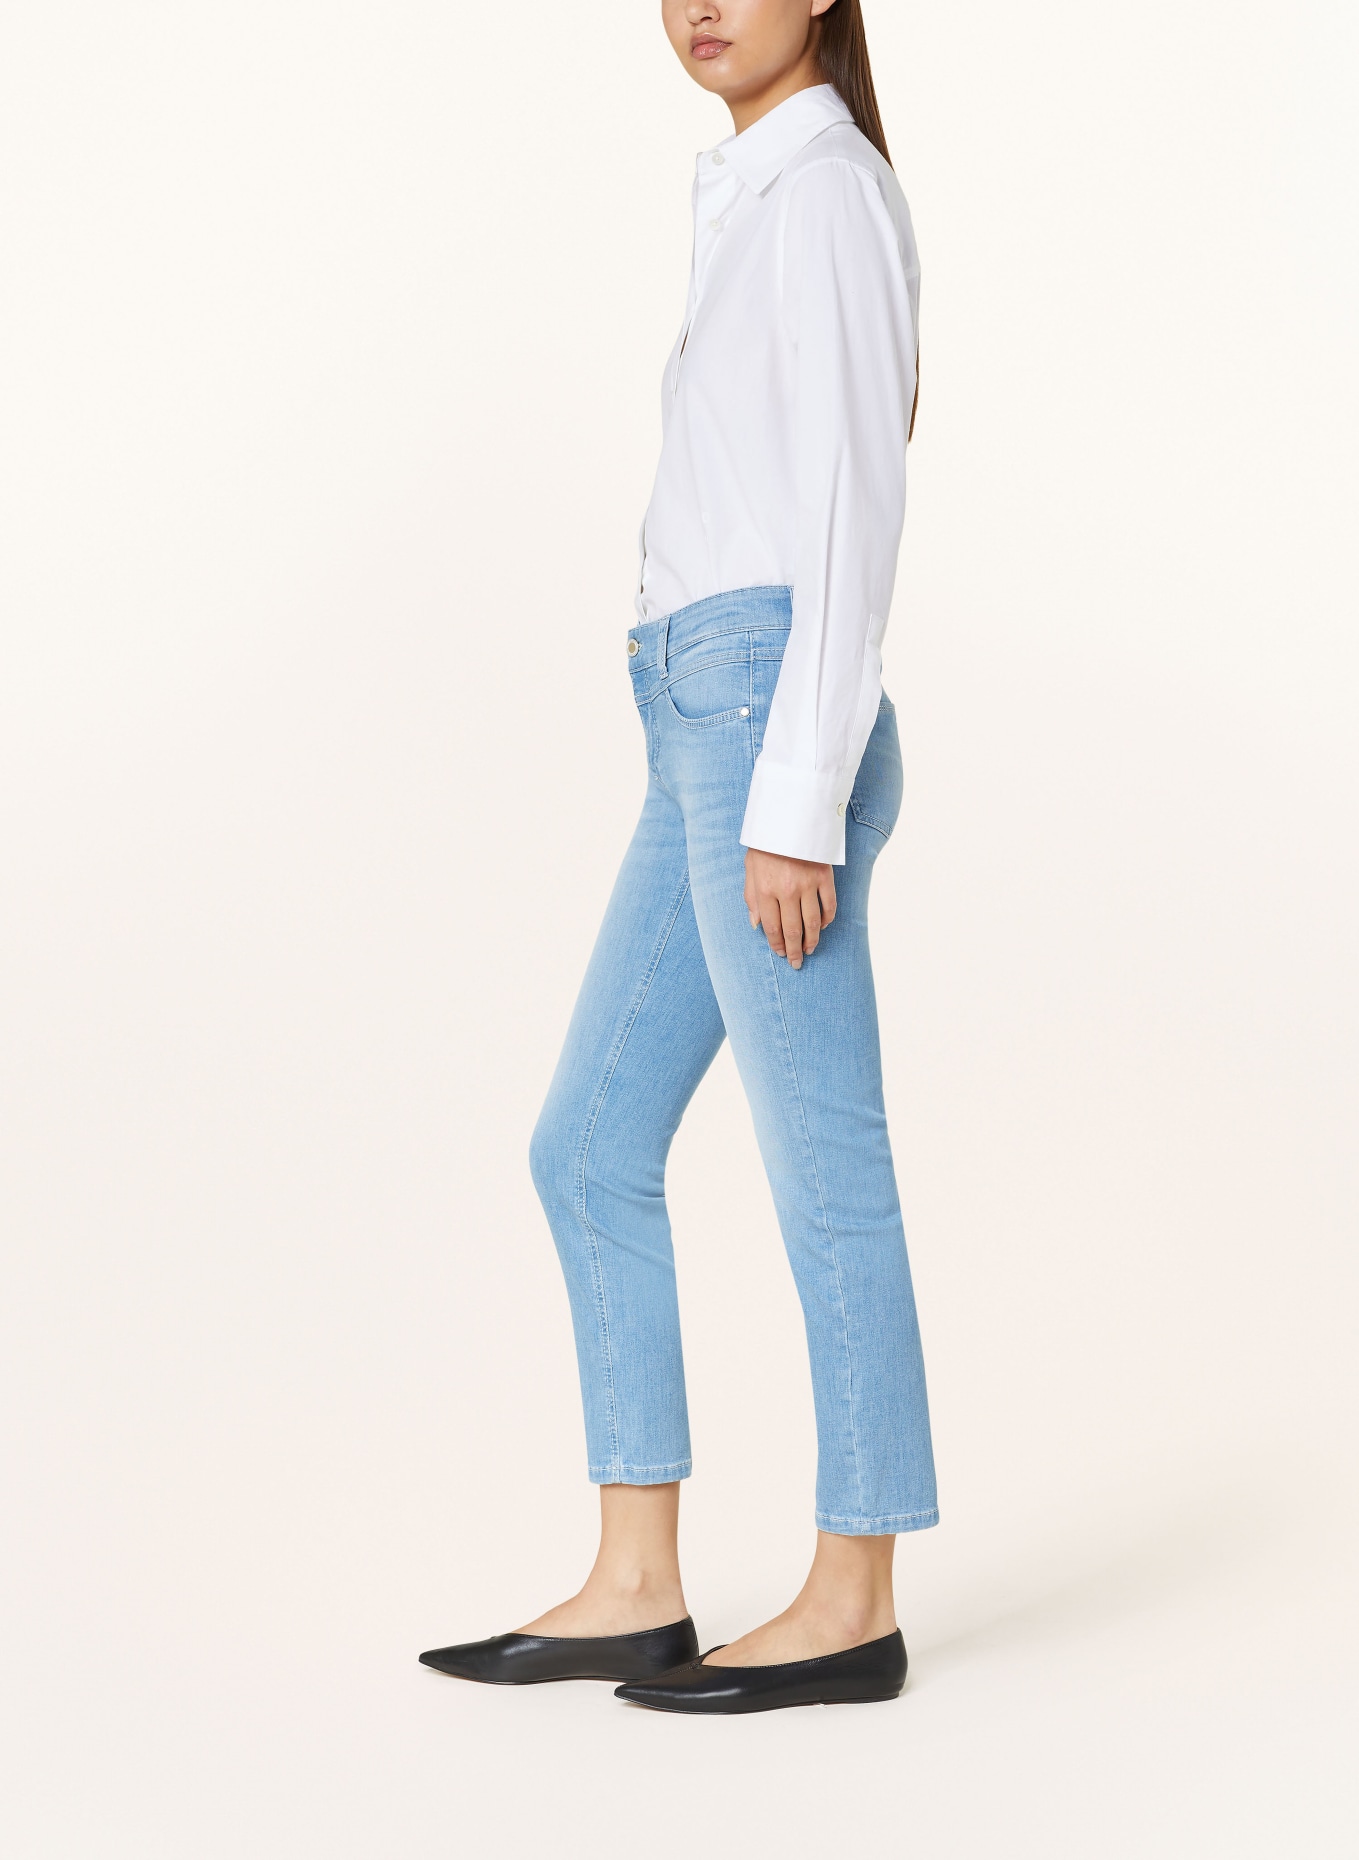 CAMBIO 7/8 jeans POSH, Color: 5230 sunny bleached contrast (Image 4)